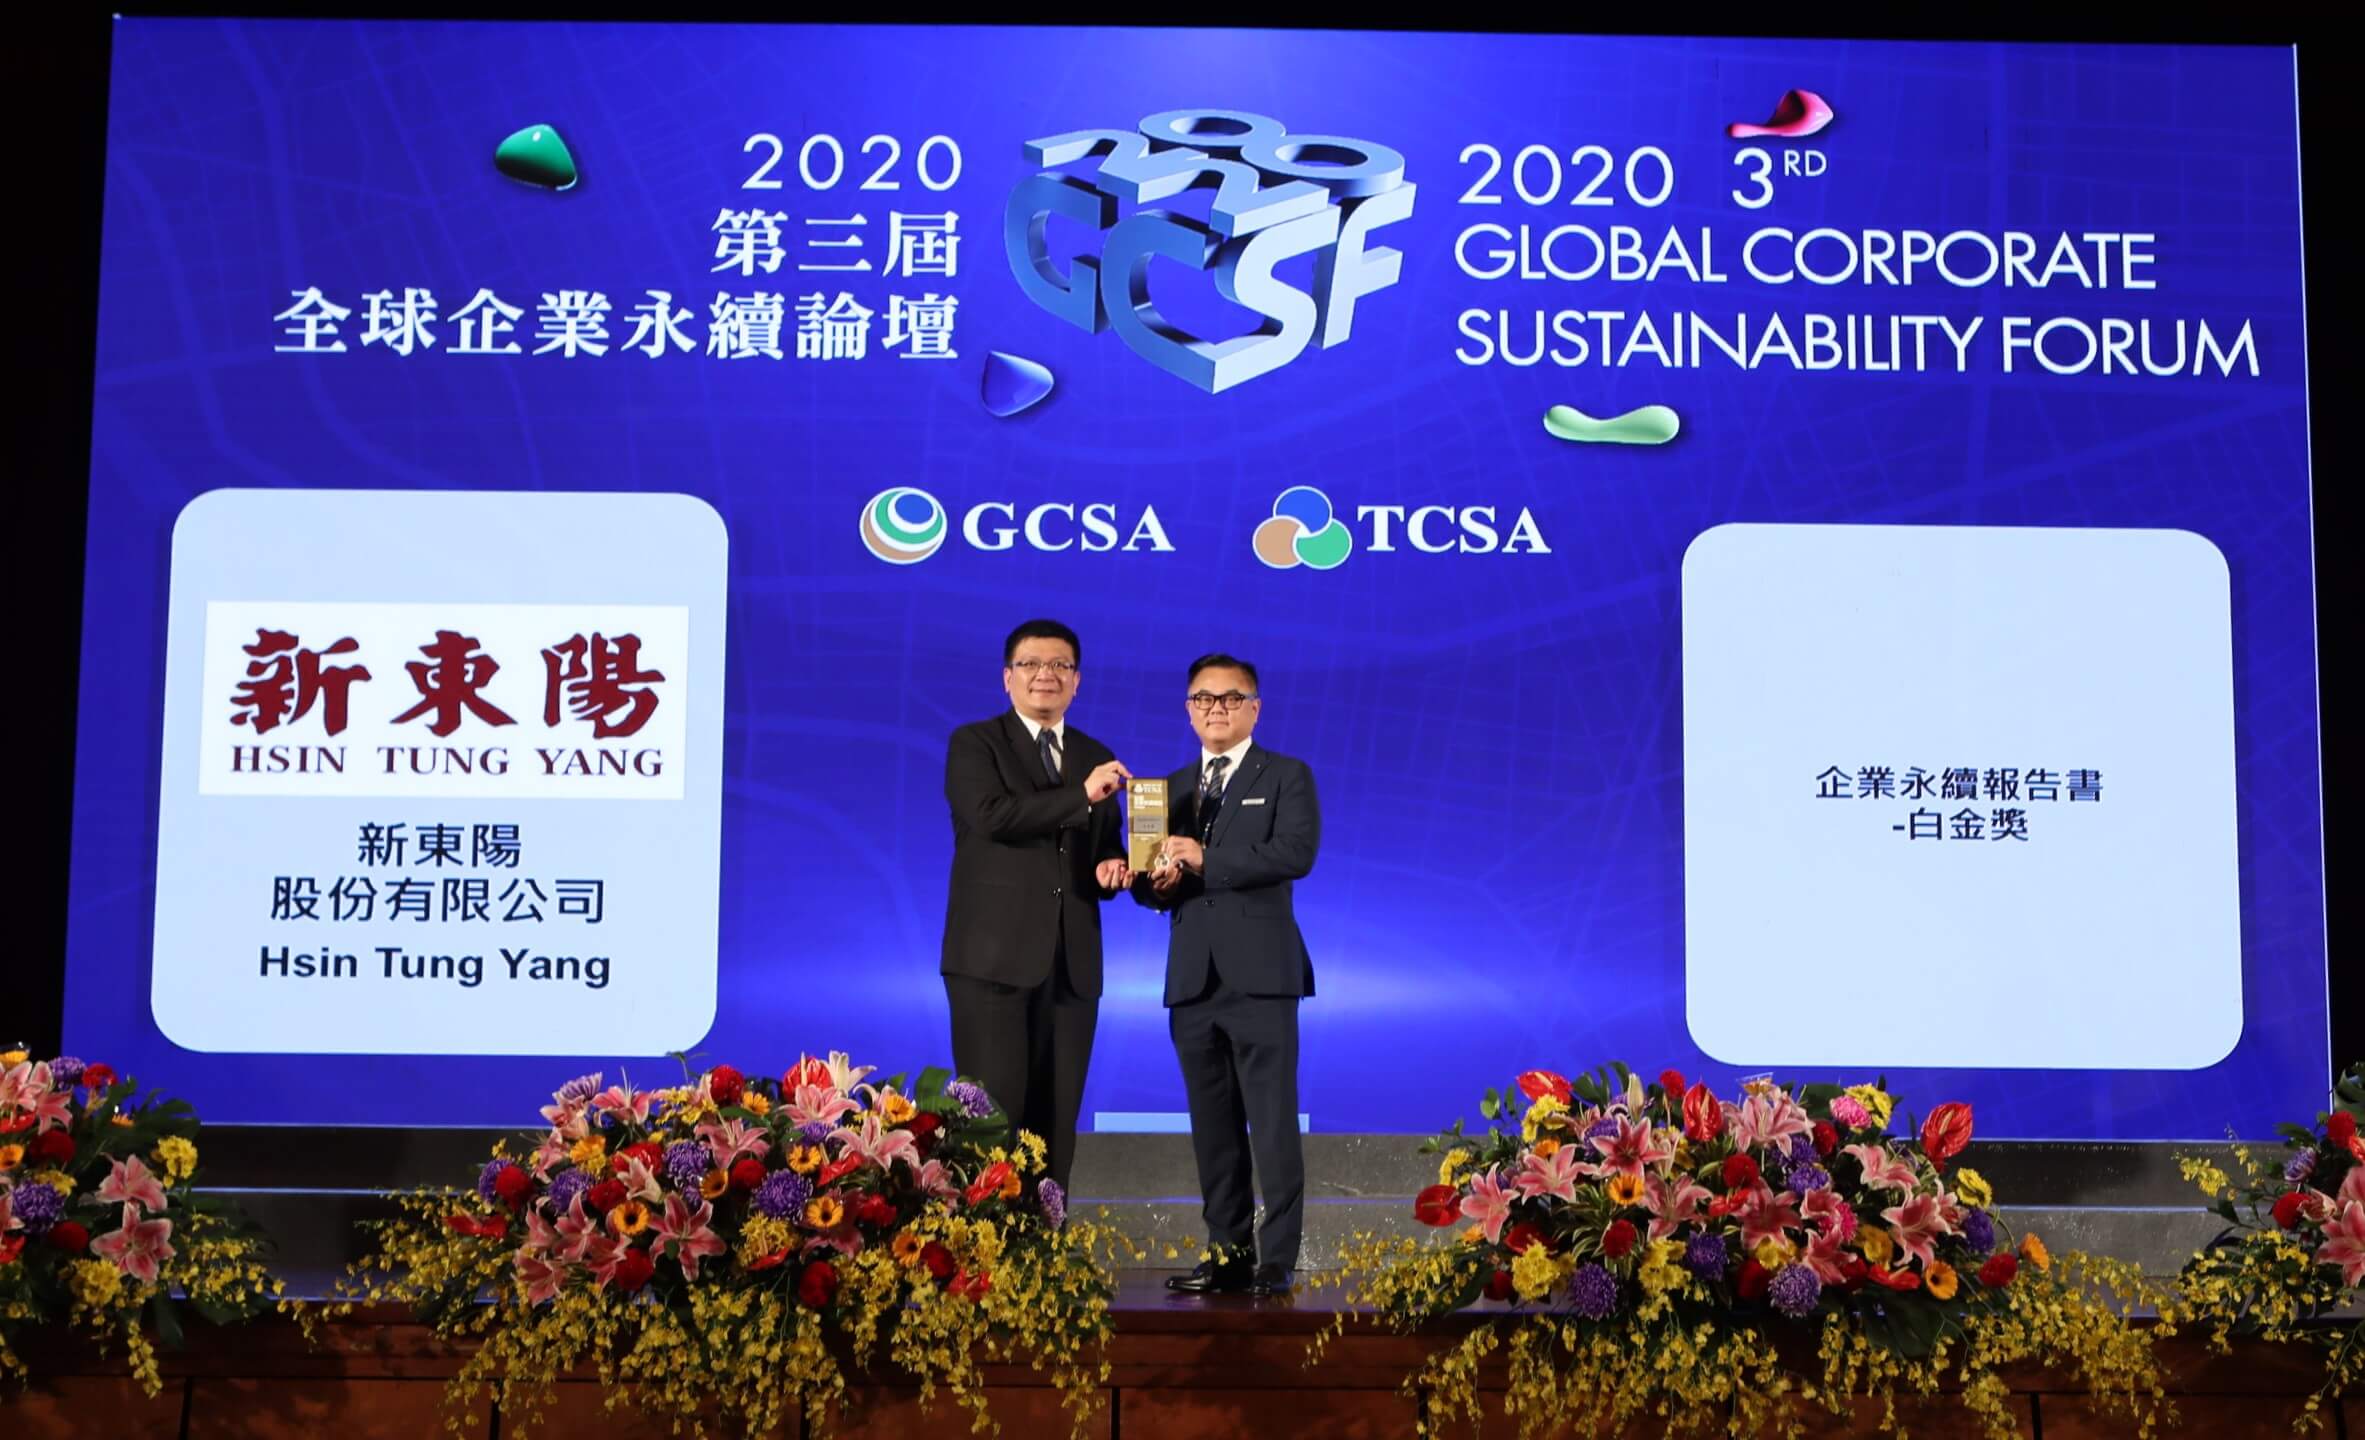 Hsin Tung Yang, First Time Submitting, was Proudly Awarded TCSA’s Platinum Award